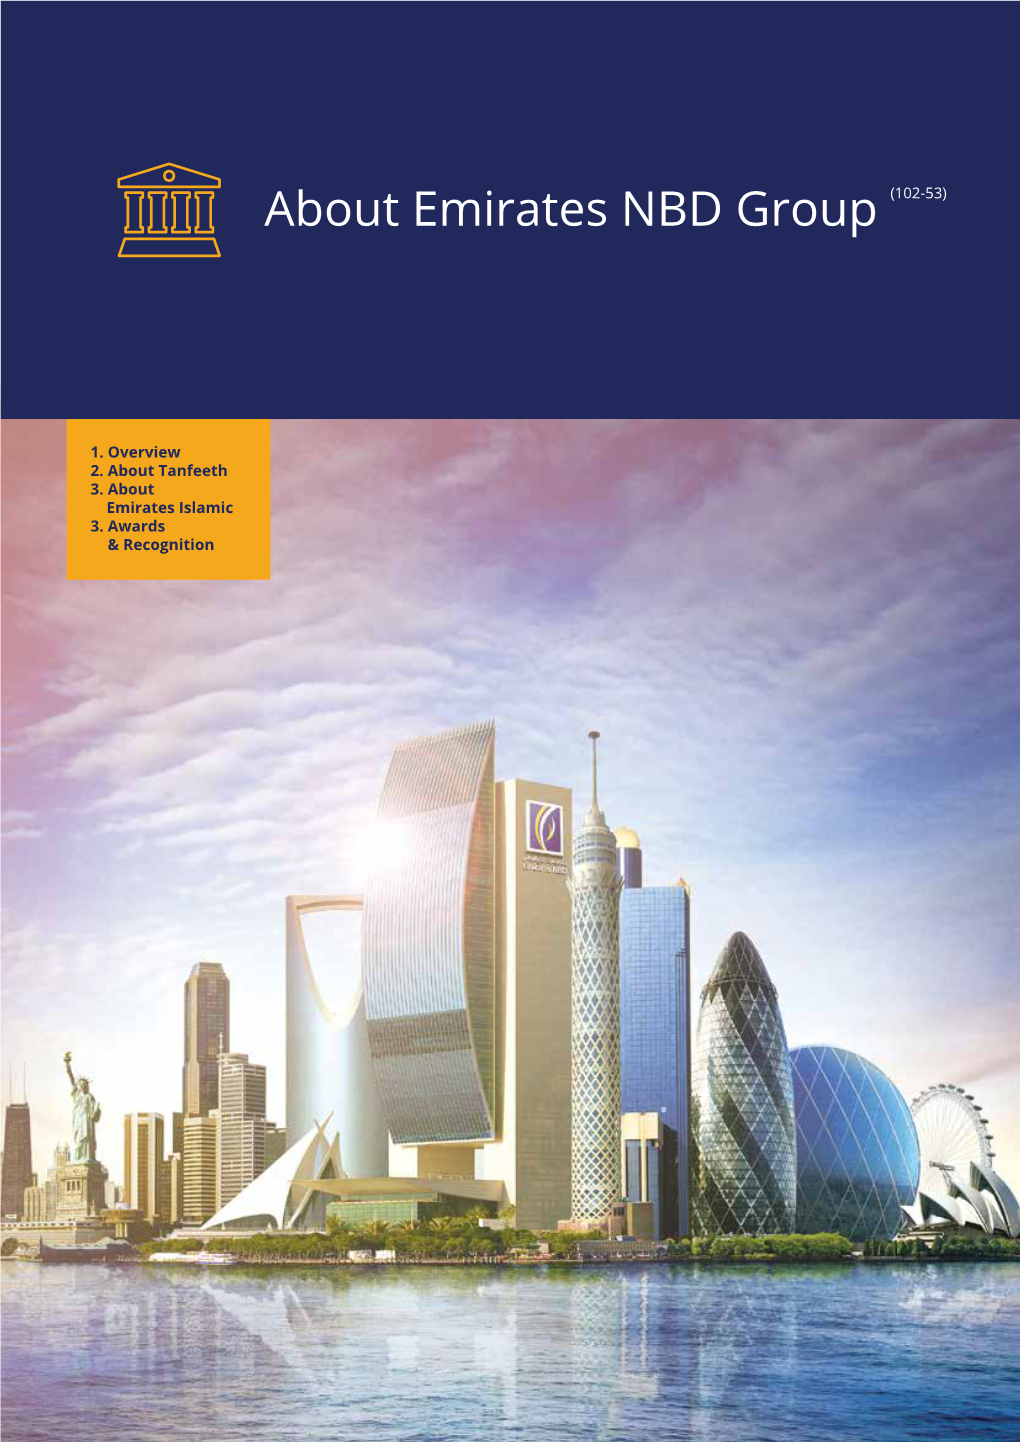 About Emirates NBD Group (102-53)